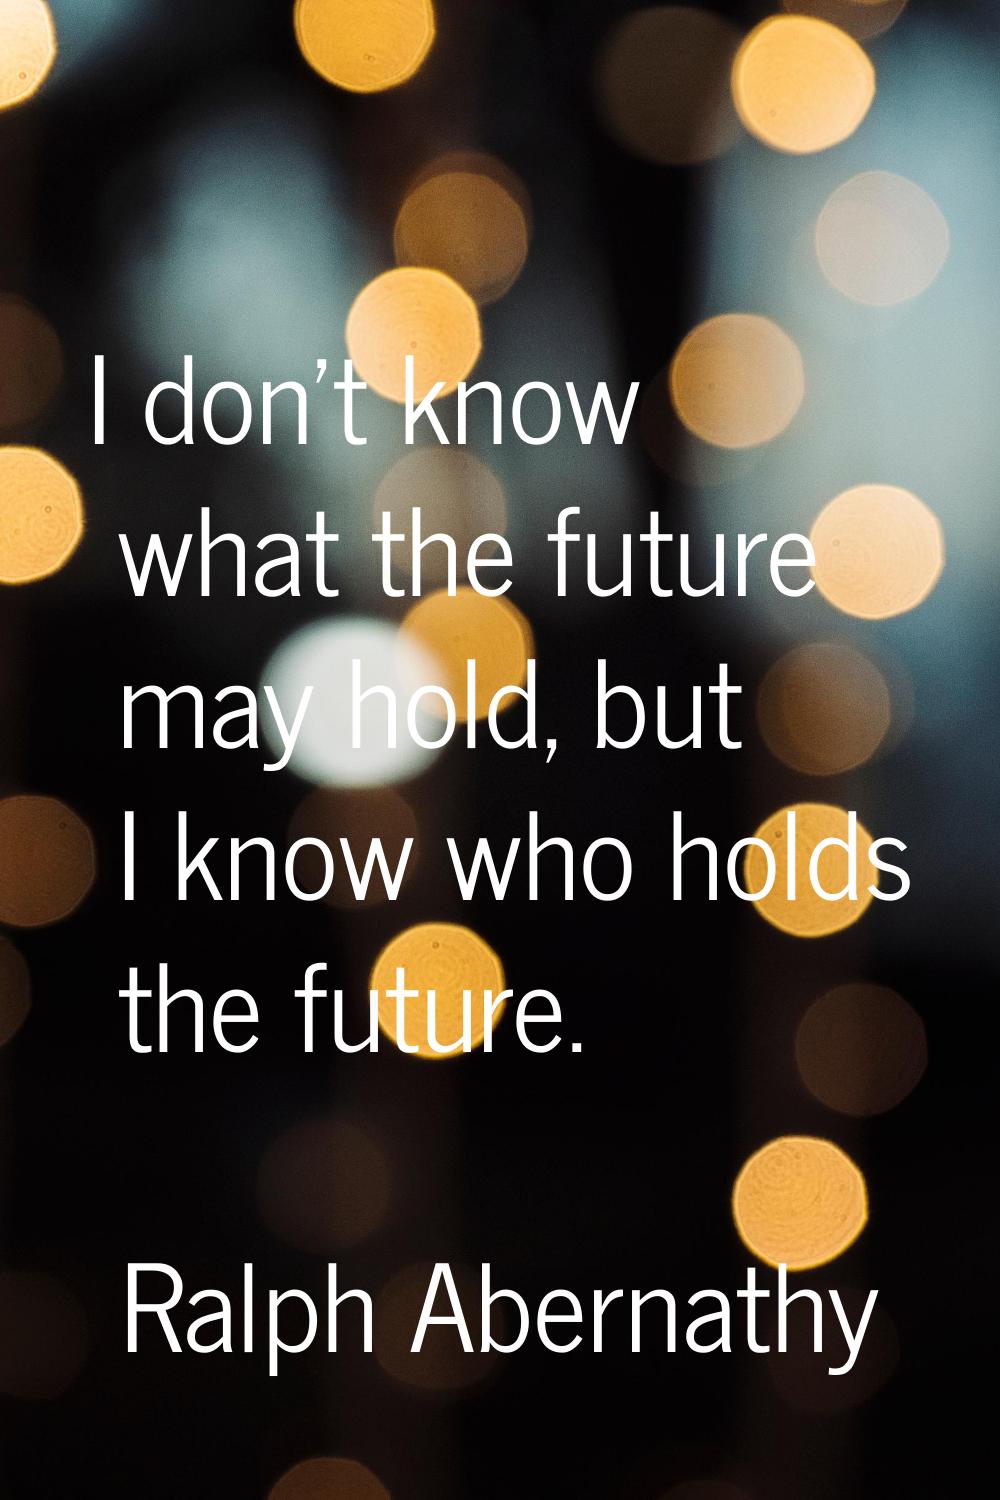 I don't know what the future may hold, but I know who holds the future.